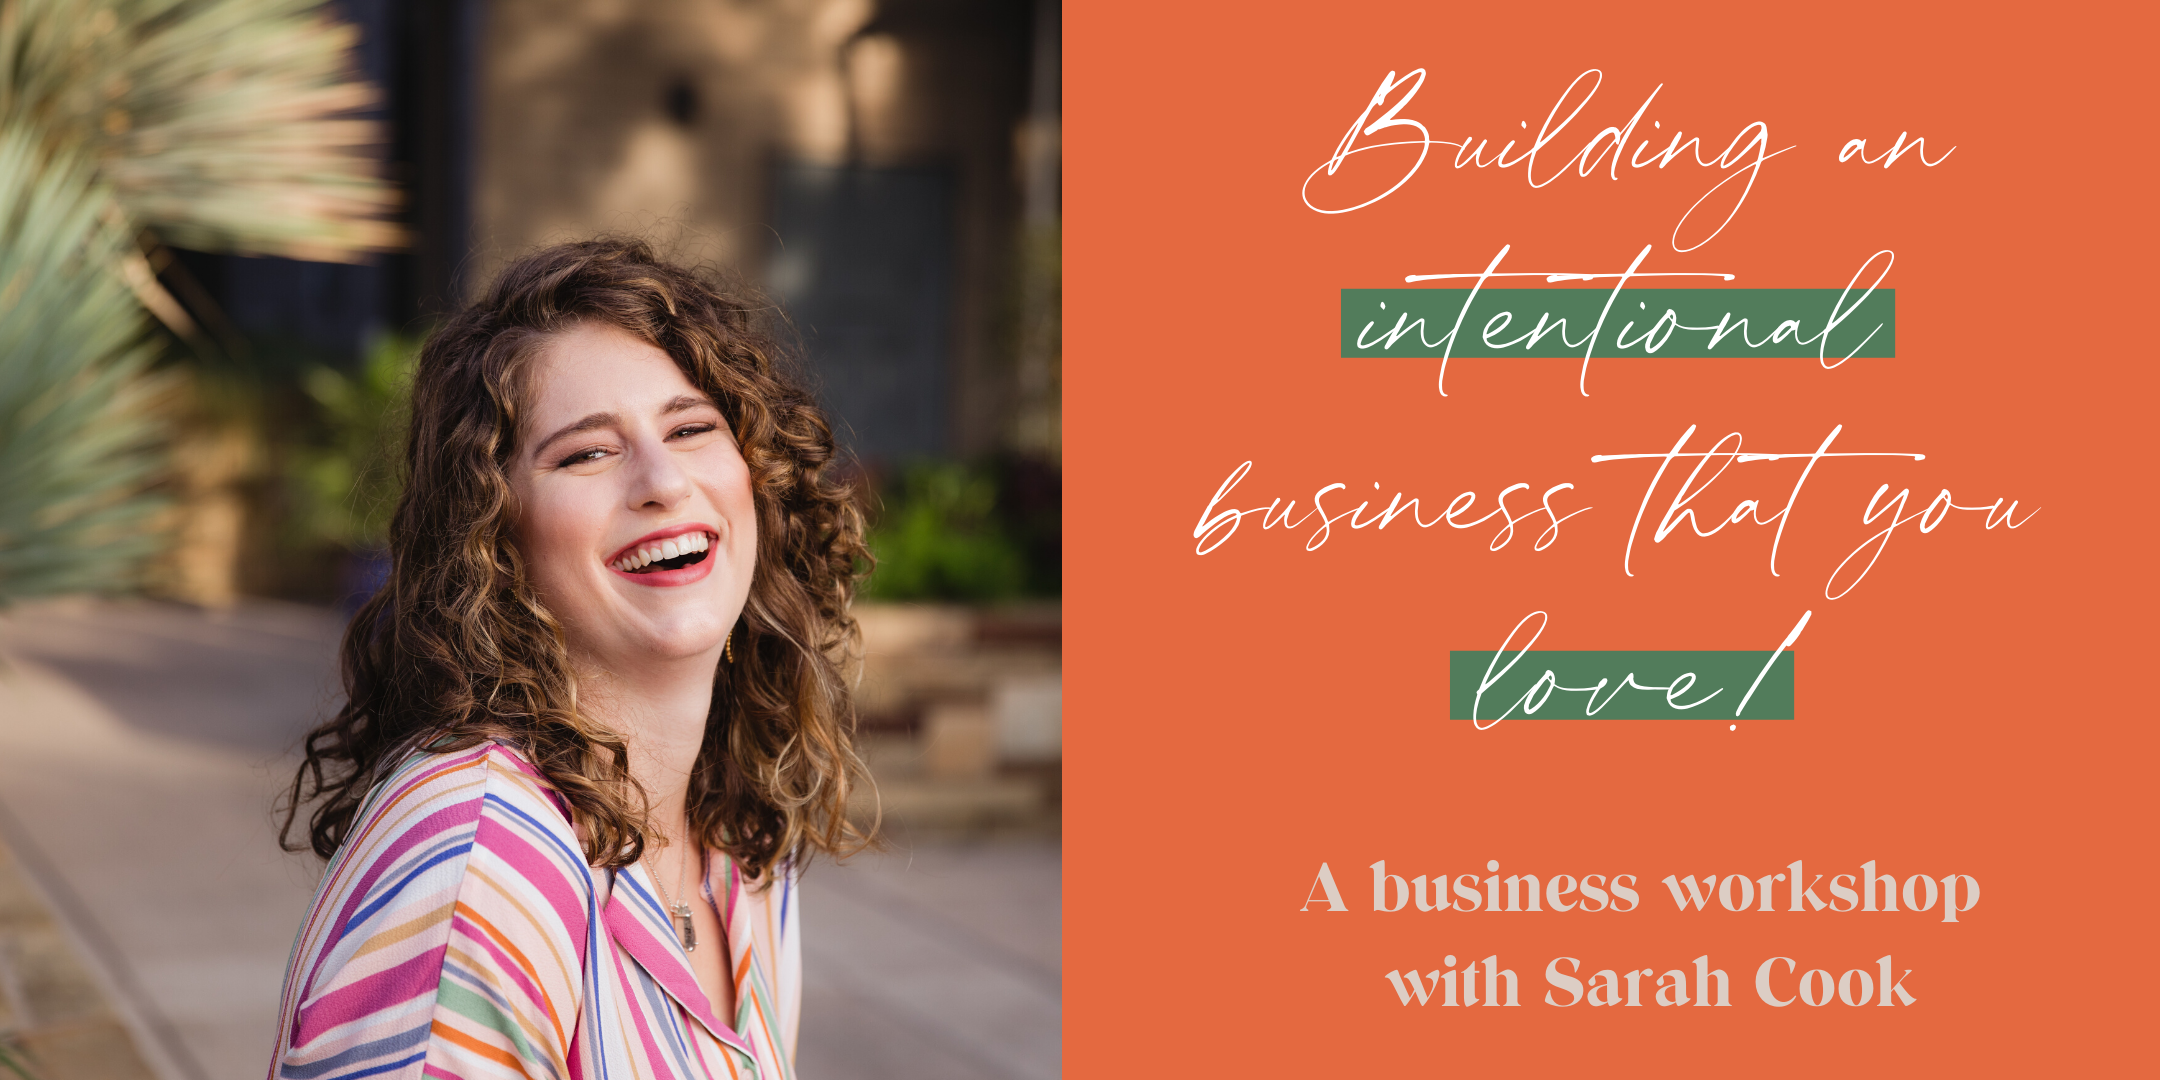 Building an INTENTIONAL business that you love!